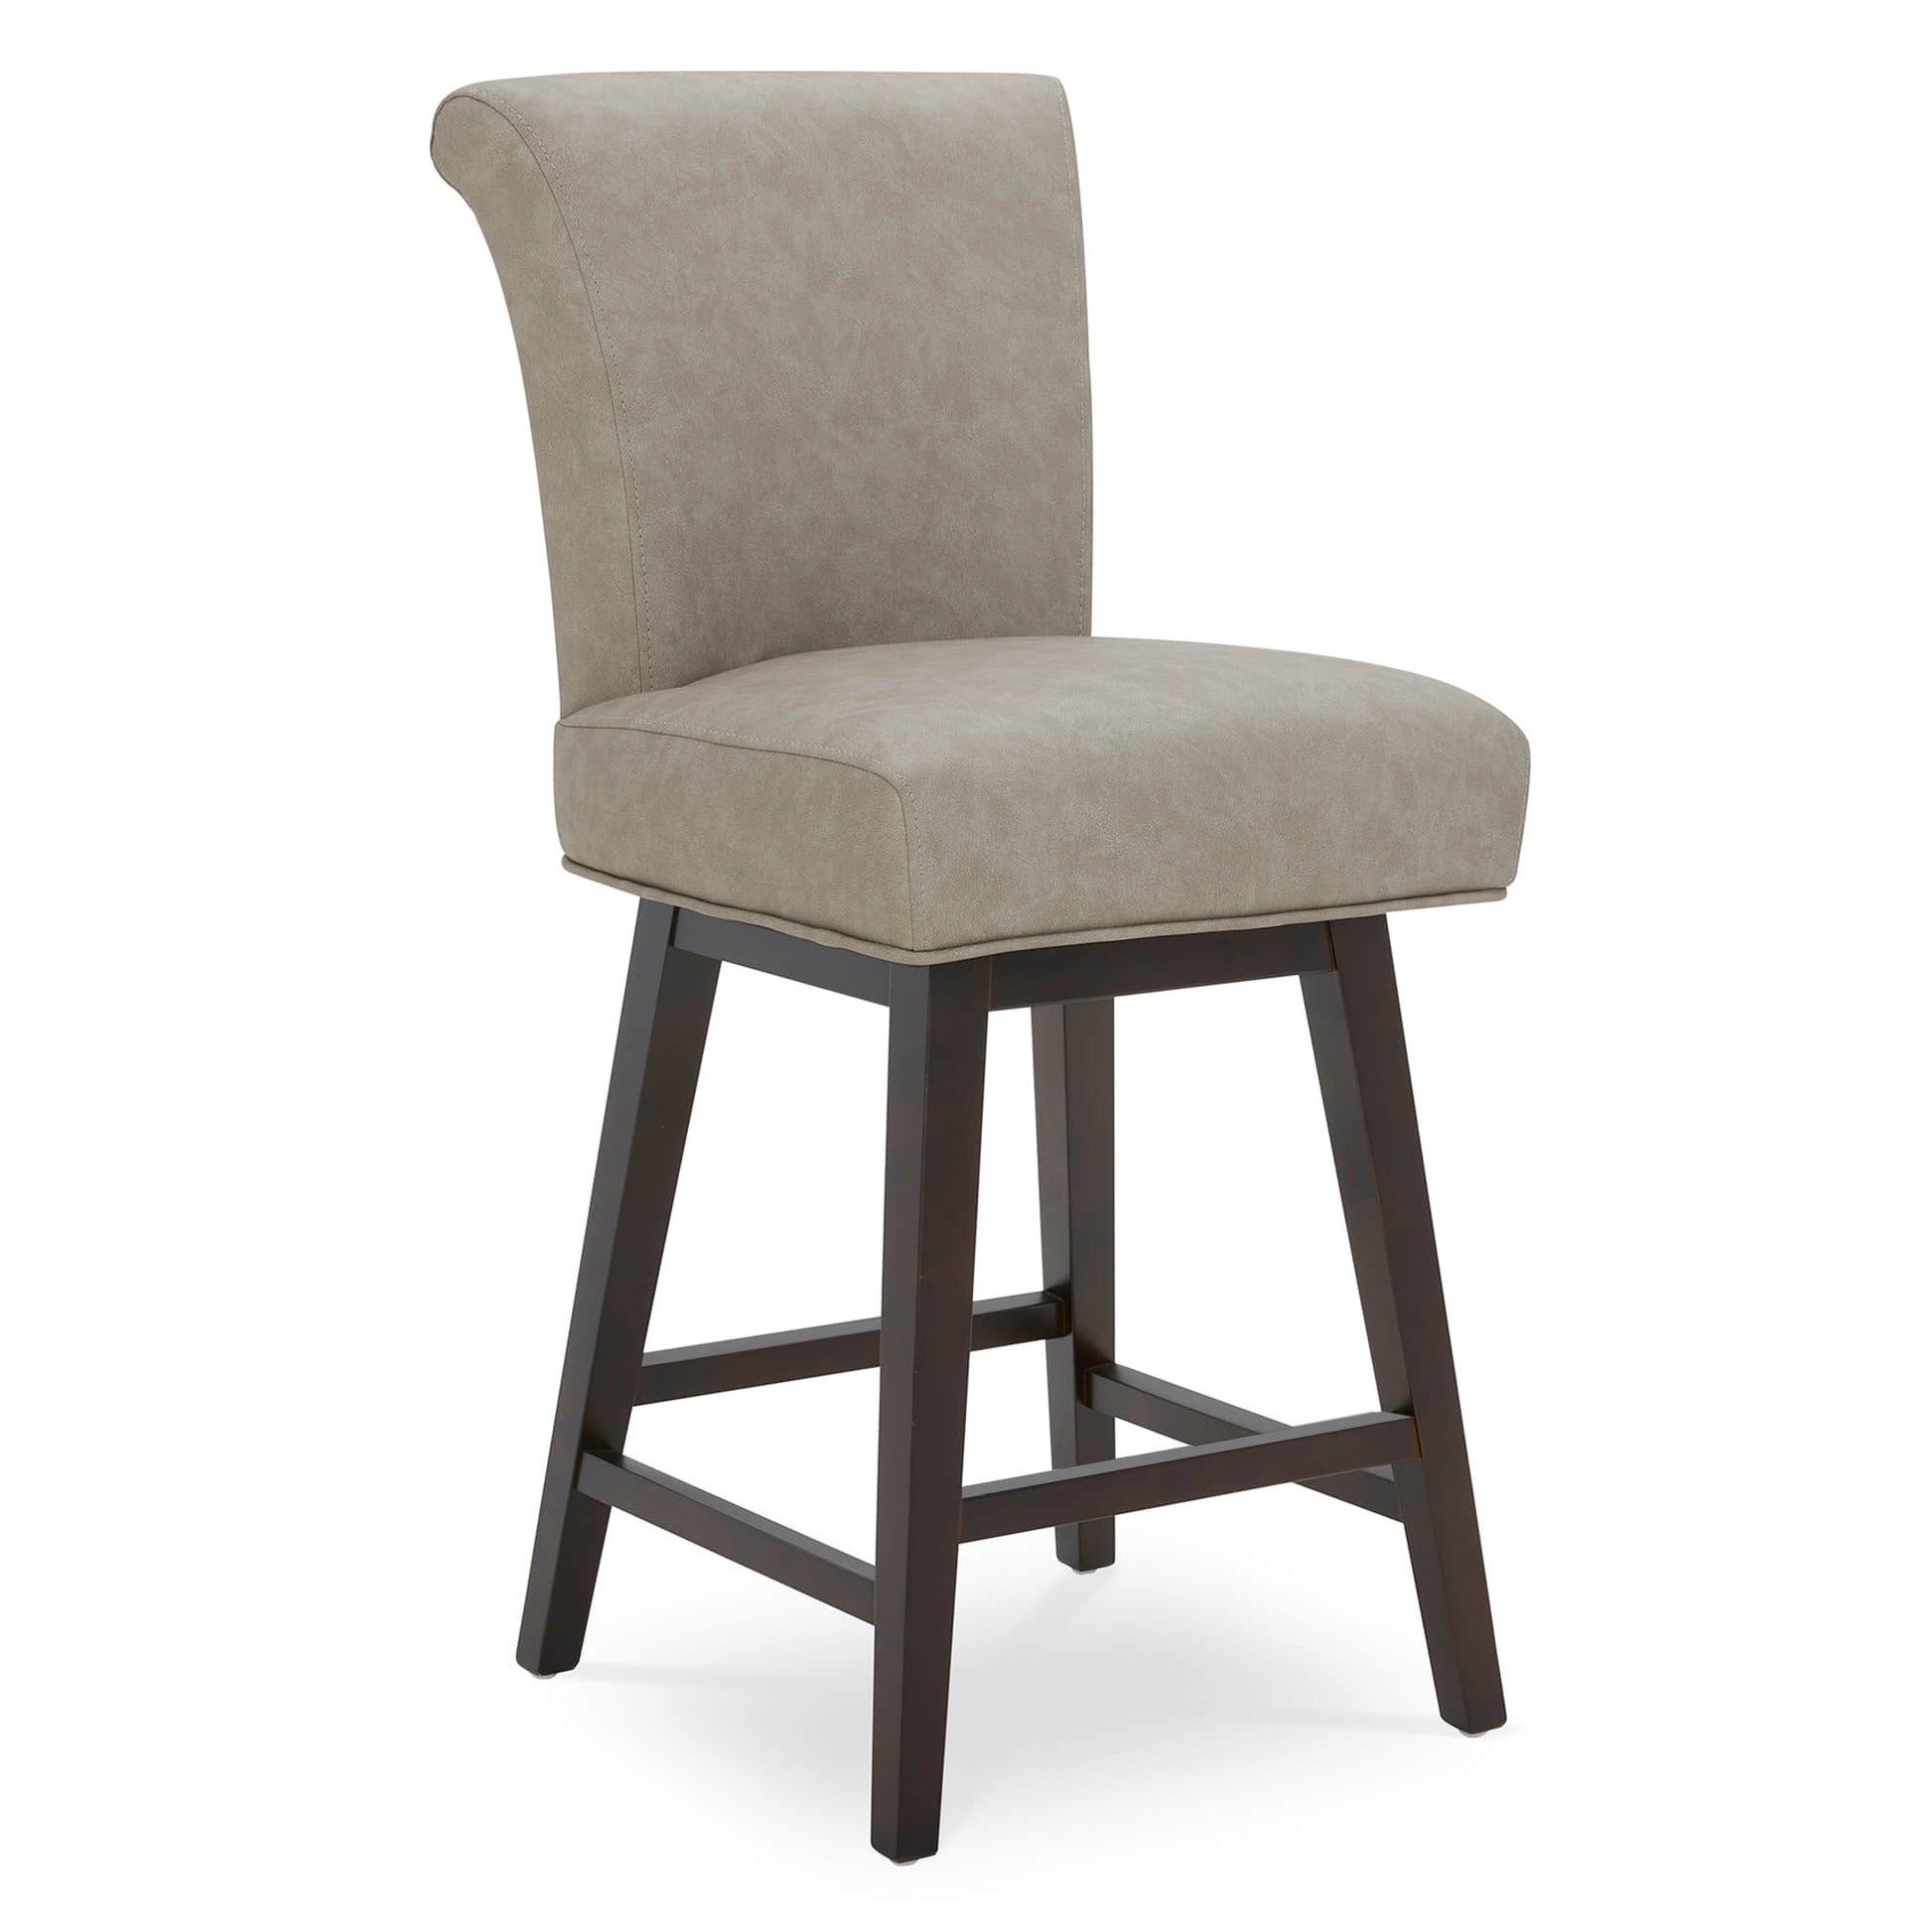 CHITA LIVING-Alina Modern Swivel Counter Stool-Counter Stools-Faux Leather-Stone Gray-1-Pack